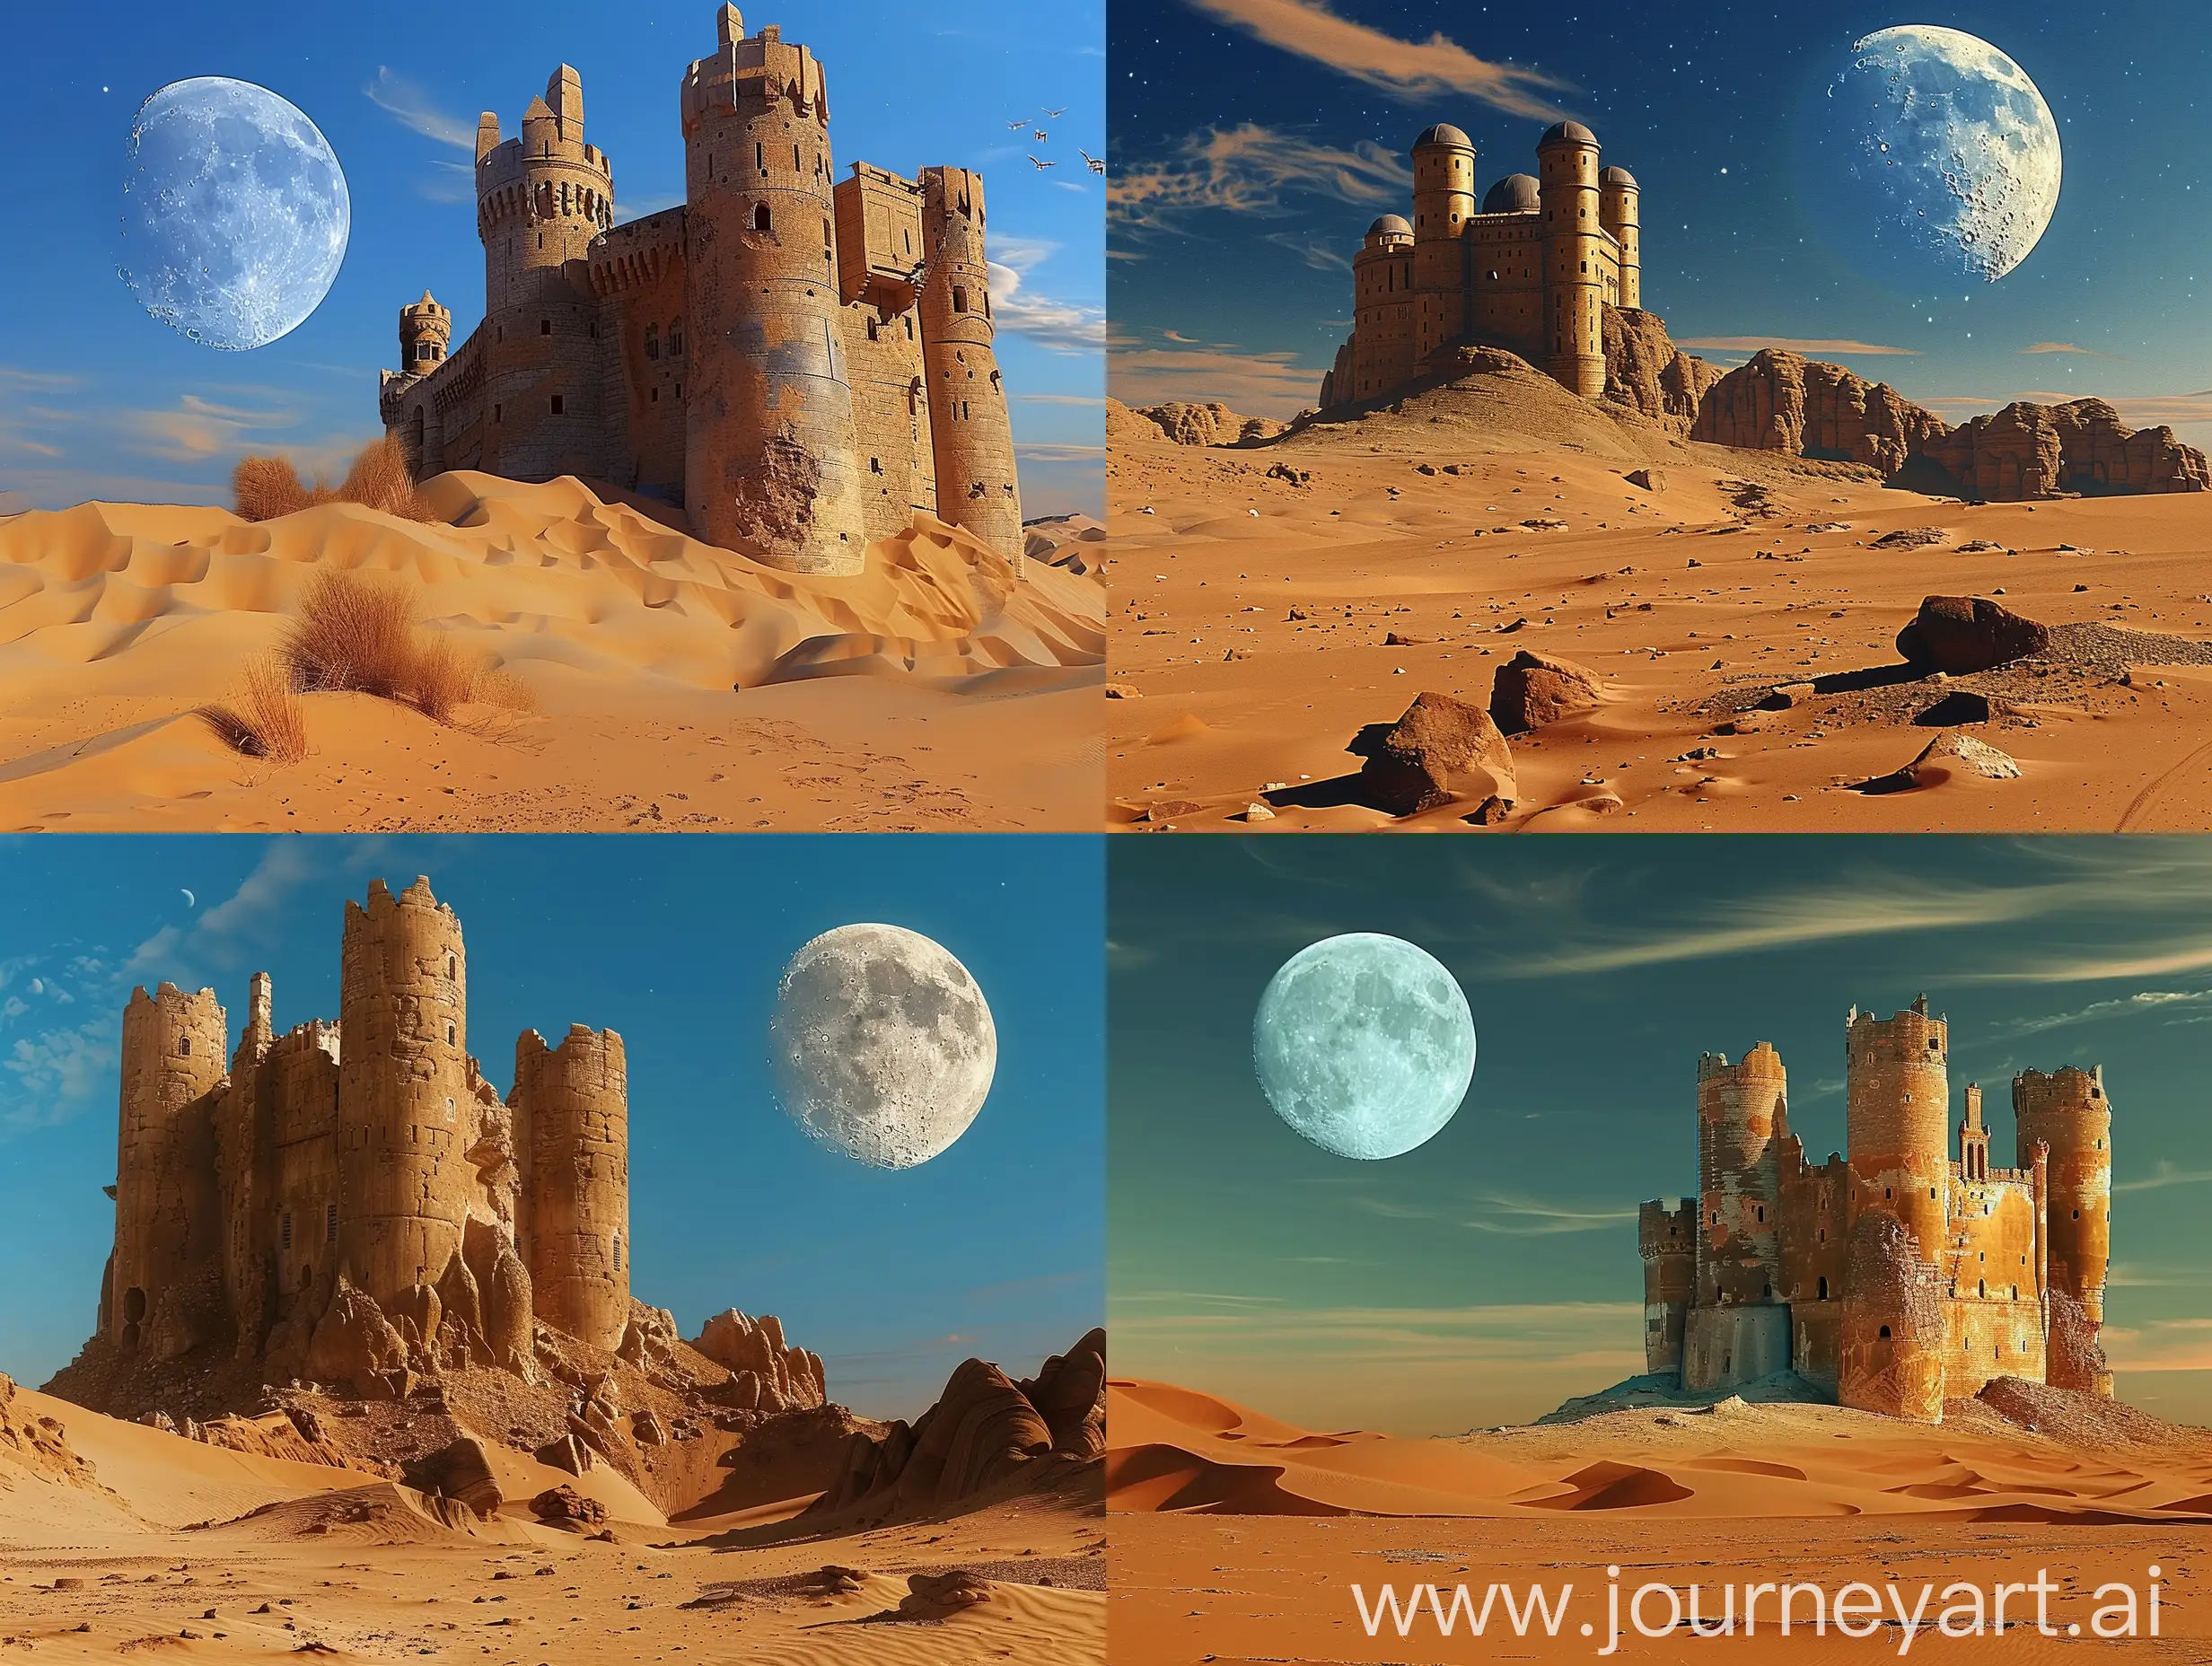 cinematic, film Dune, Bratislava castle in desert with moon on the background, --style raw